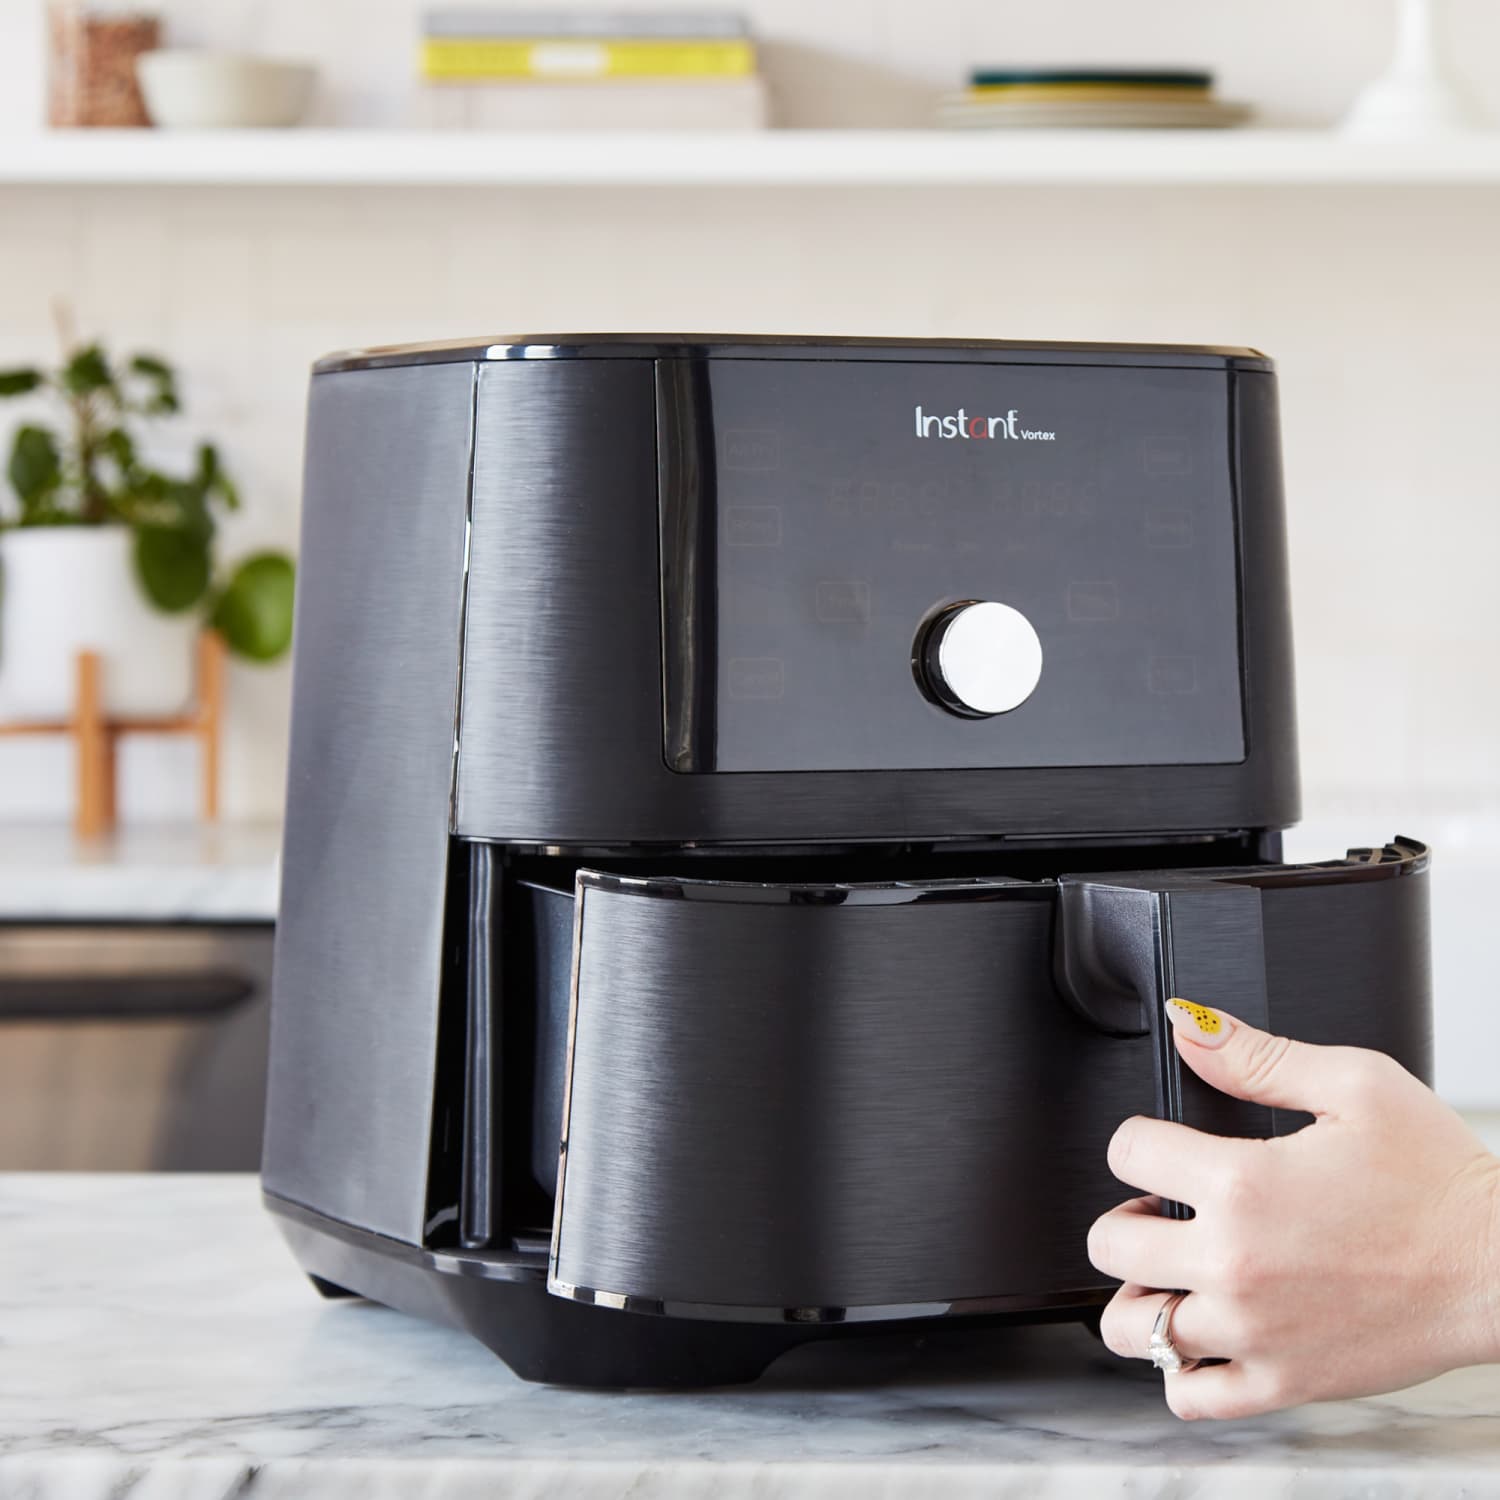 Instant brand appliances are up to 40% off at